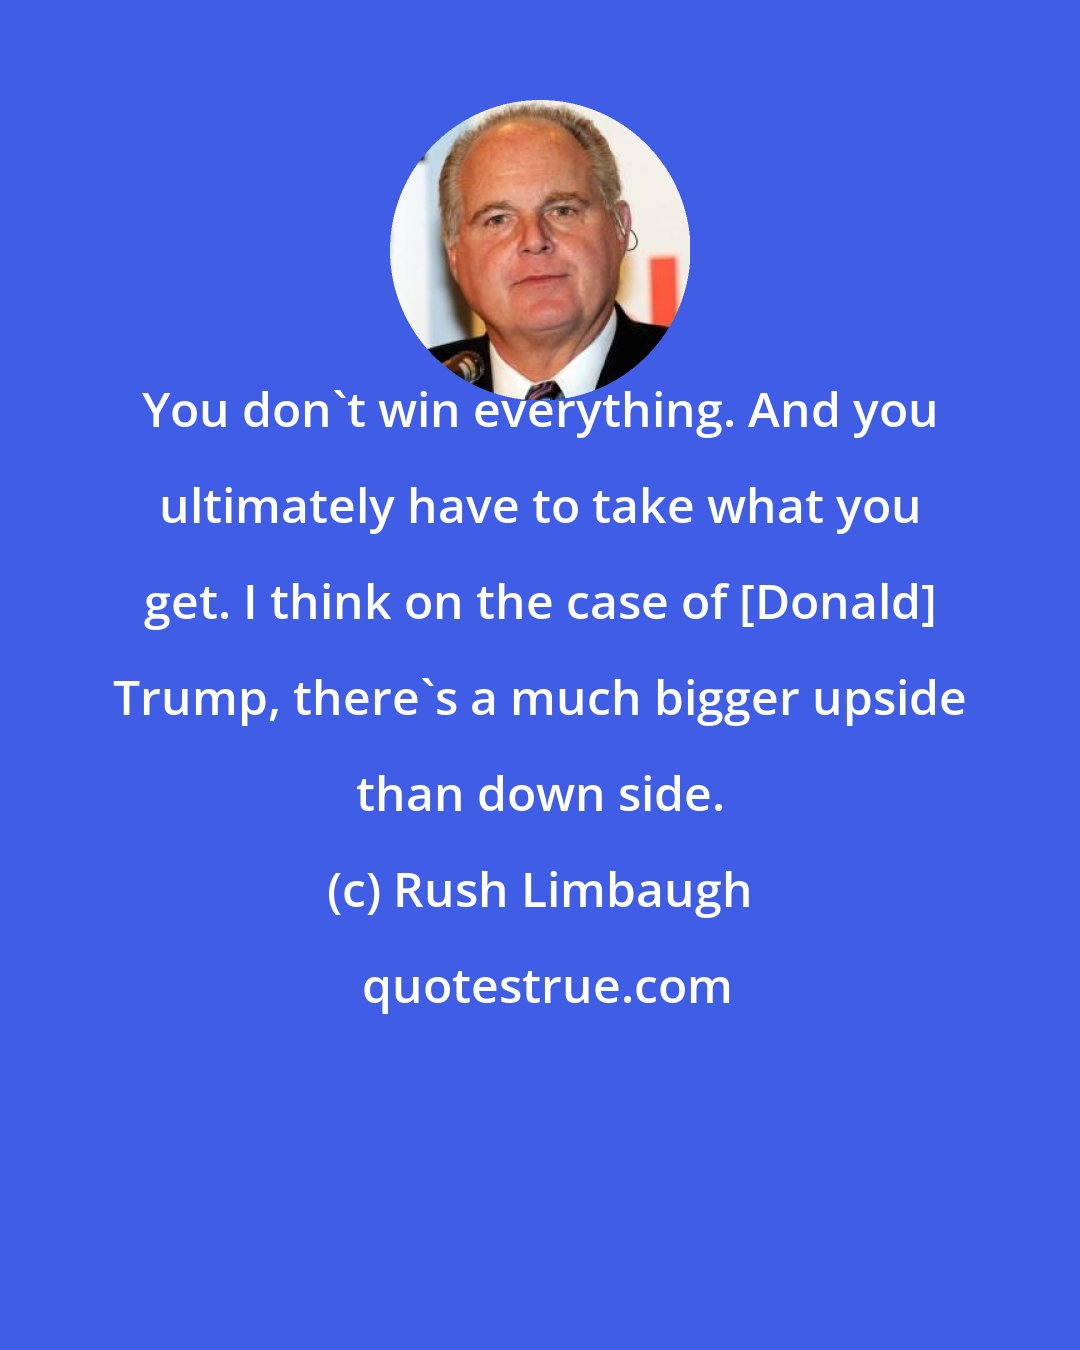 Rush Limbaugh: You don't win everything. And you ultimately have to take what you get. I think on the case of [Donald] Trump, there's a much bigger upside than down side.